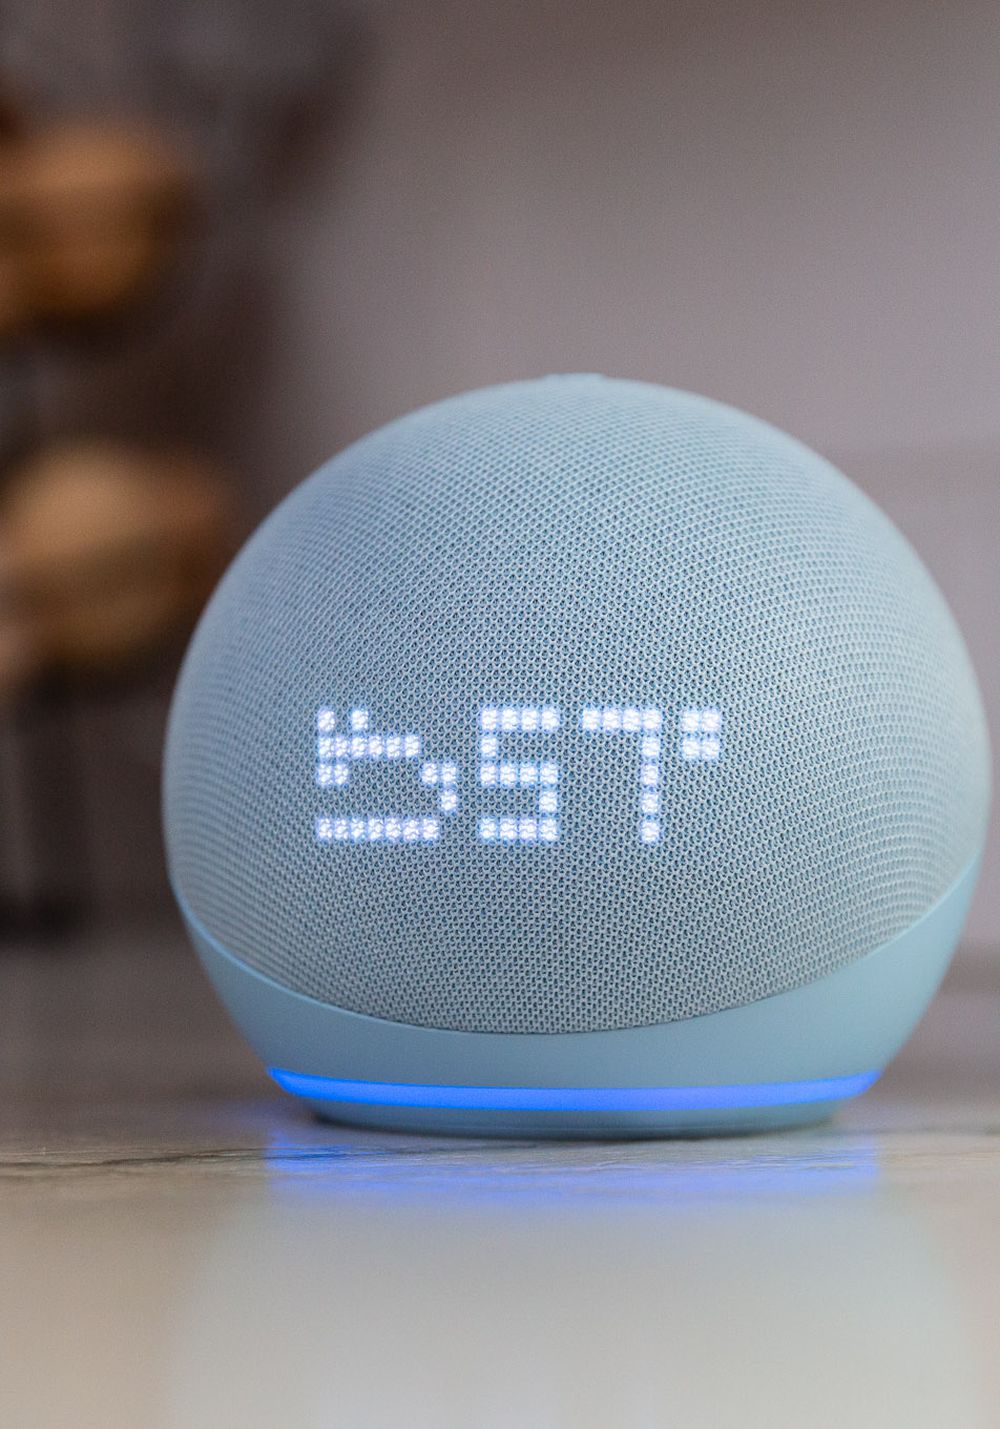 Echo Dot with Clock (2022) review: an almost perfect smart speaker